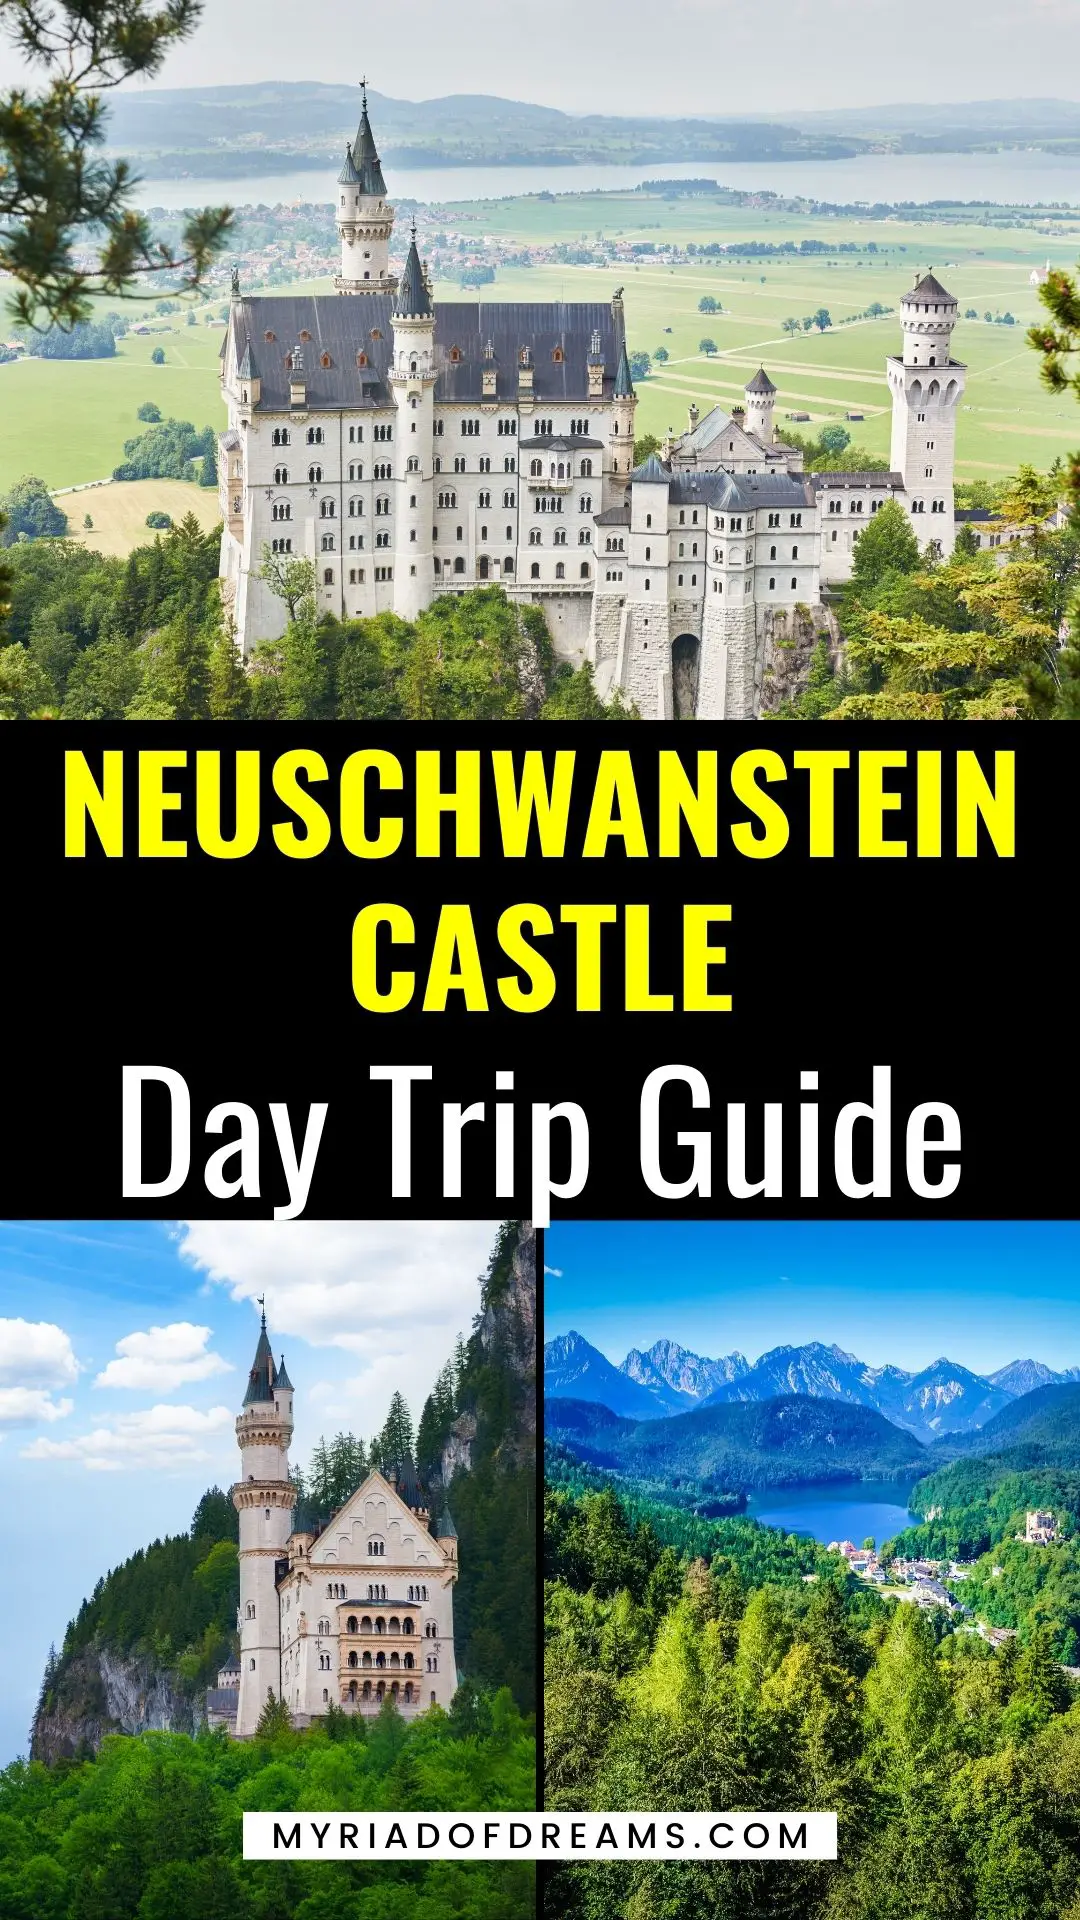 The ultimate guide to neuschwanstein casle in Germany. Explore the fairytale castle in Germany on a day trip from Munich. Read on to find the best ways to visit the castle and the best things to do around Neuschwanstein castle. Beautiful Neuschwanstein photography, Stunning castles in southern Germnay, Neuschwanstein castle instagrammable spots. #germany #europetravel #munich #germanytravelguide